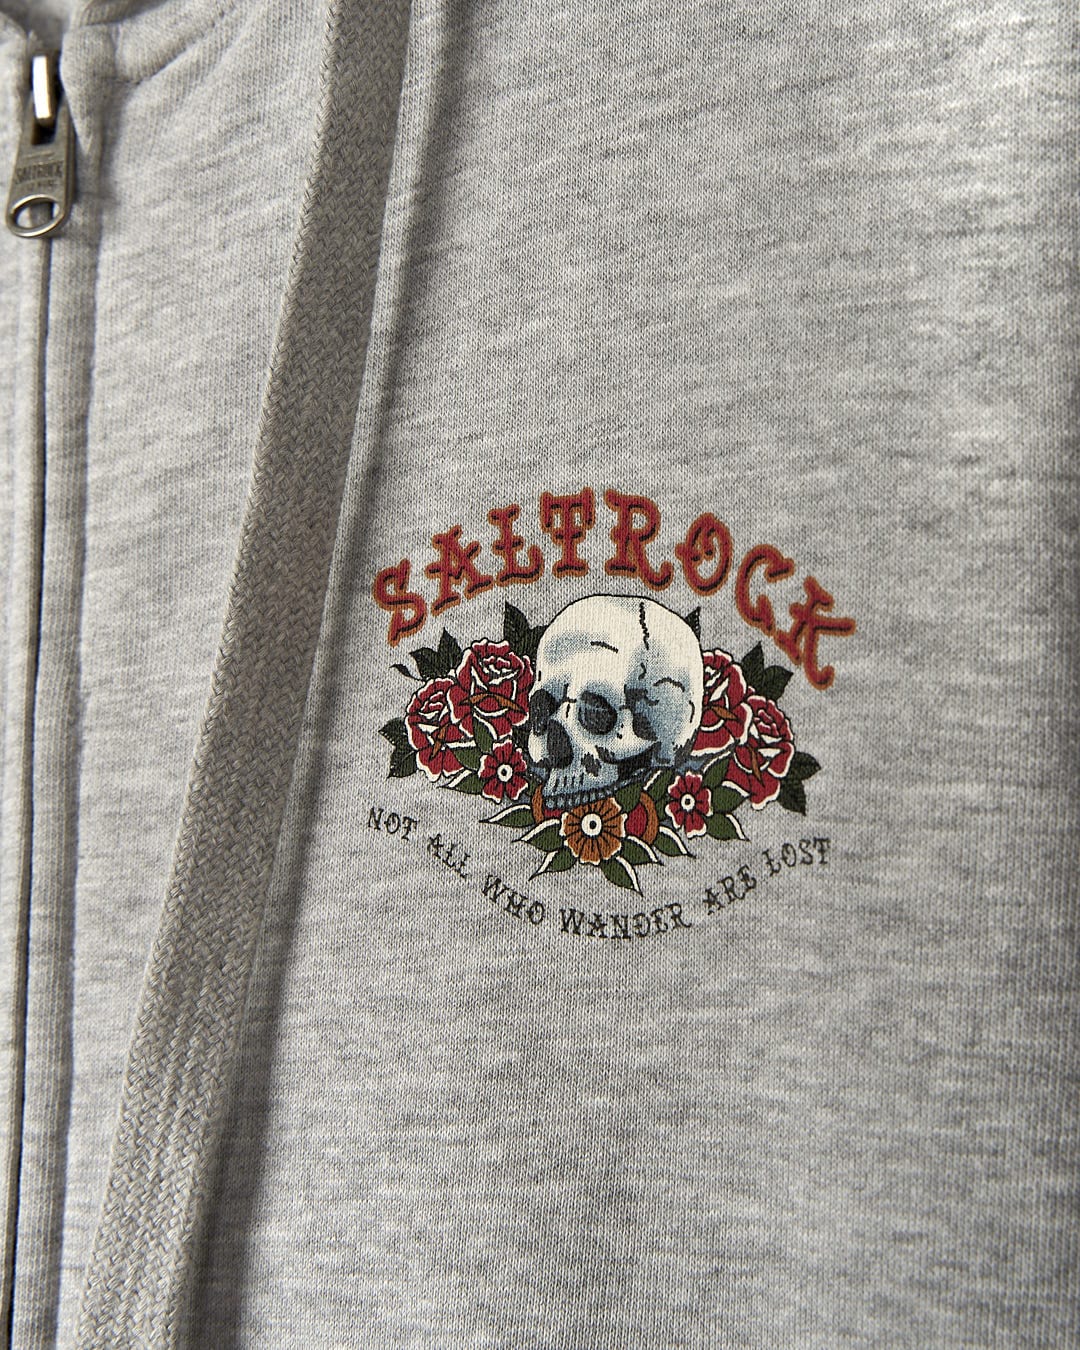 A Saltrock grey hoodie with a skull and roses on it.